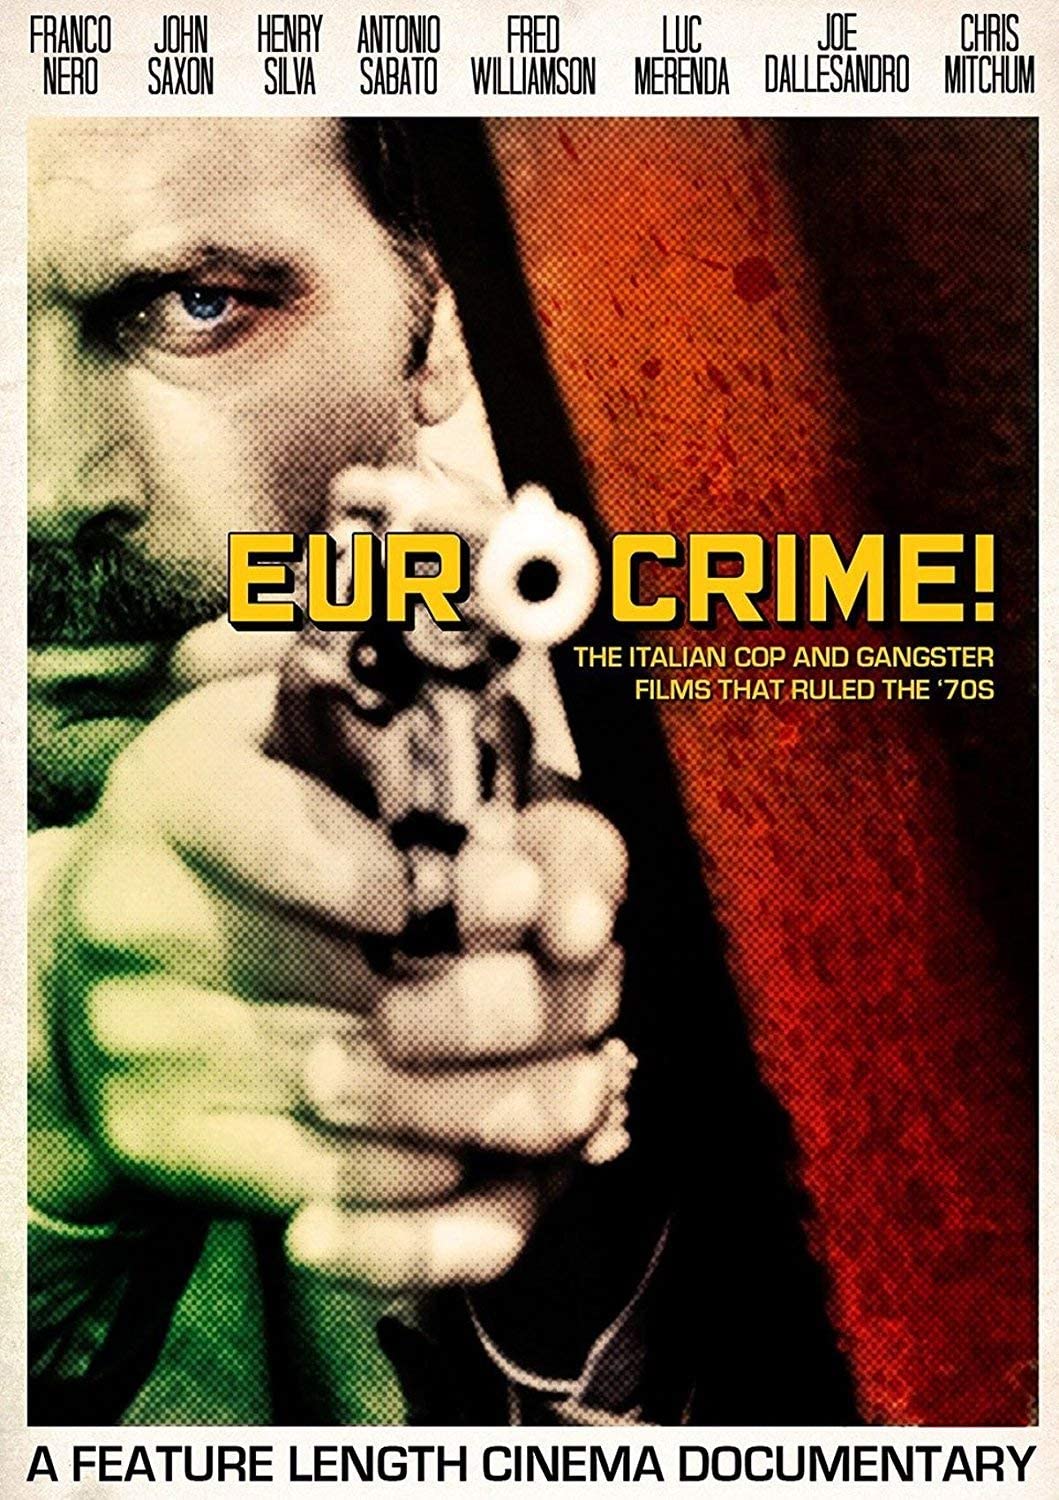 Eurocrime! The Italian Cop And Gangster Films That Ruled The '70s - Documentary/History [DVD]